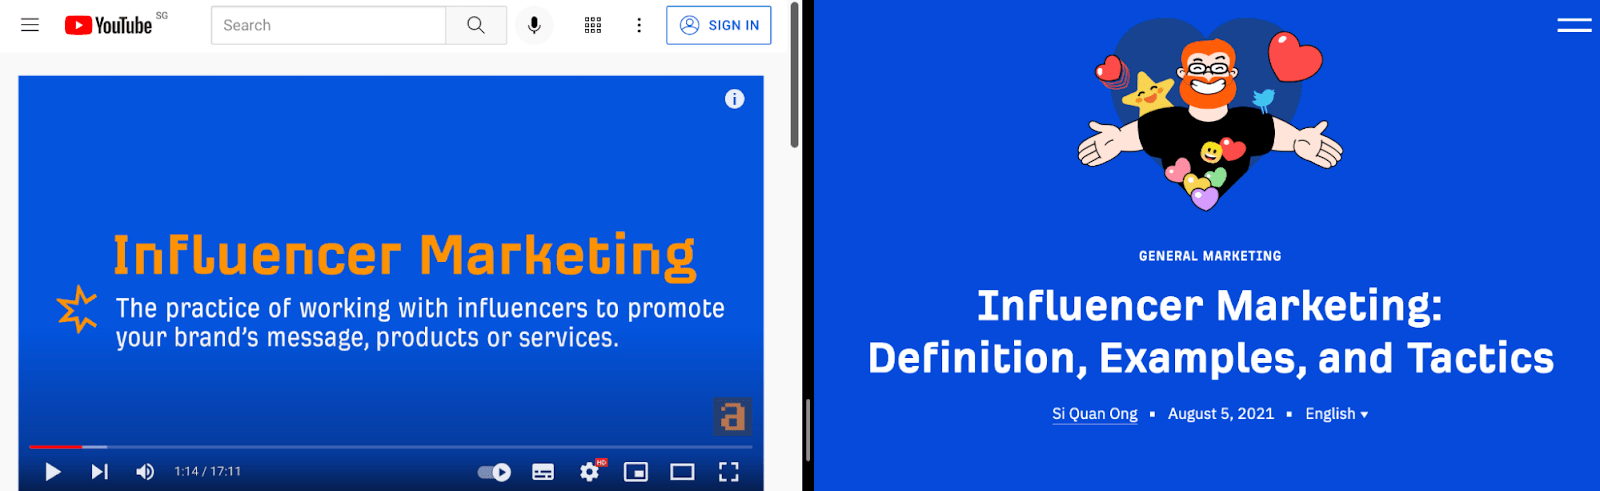 Excerpt of Ahrefs' YouTube video and Ahrefs' blog article on influencer marketing